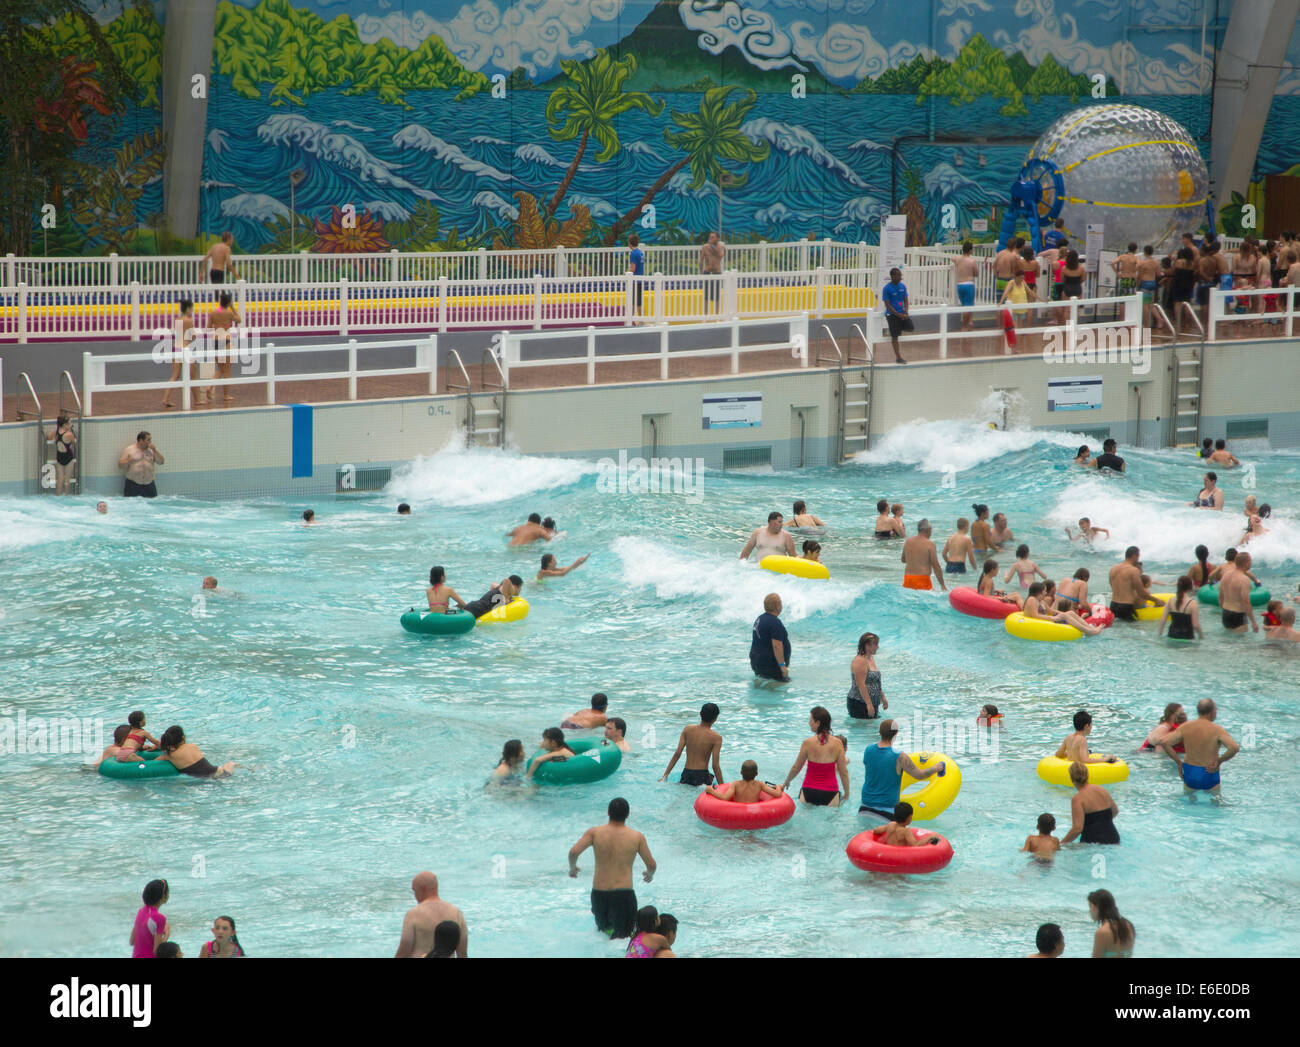 Wave Pool At World Waterpark In West Edmonton Mall One Of The Largest Shopping Centers In The World Stock Photo Alamy